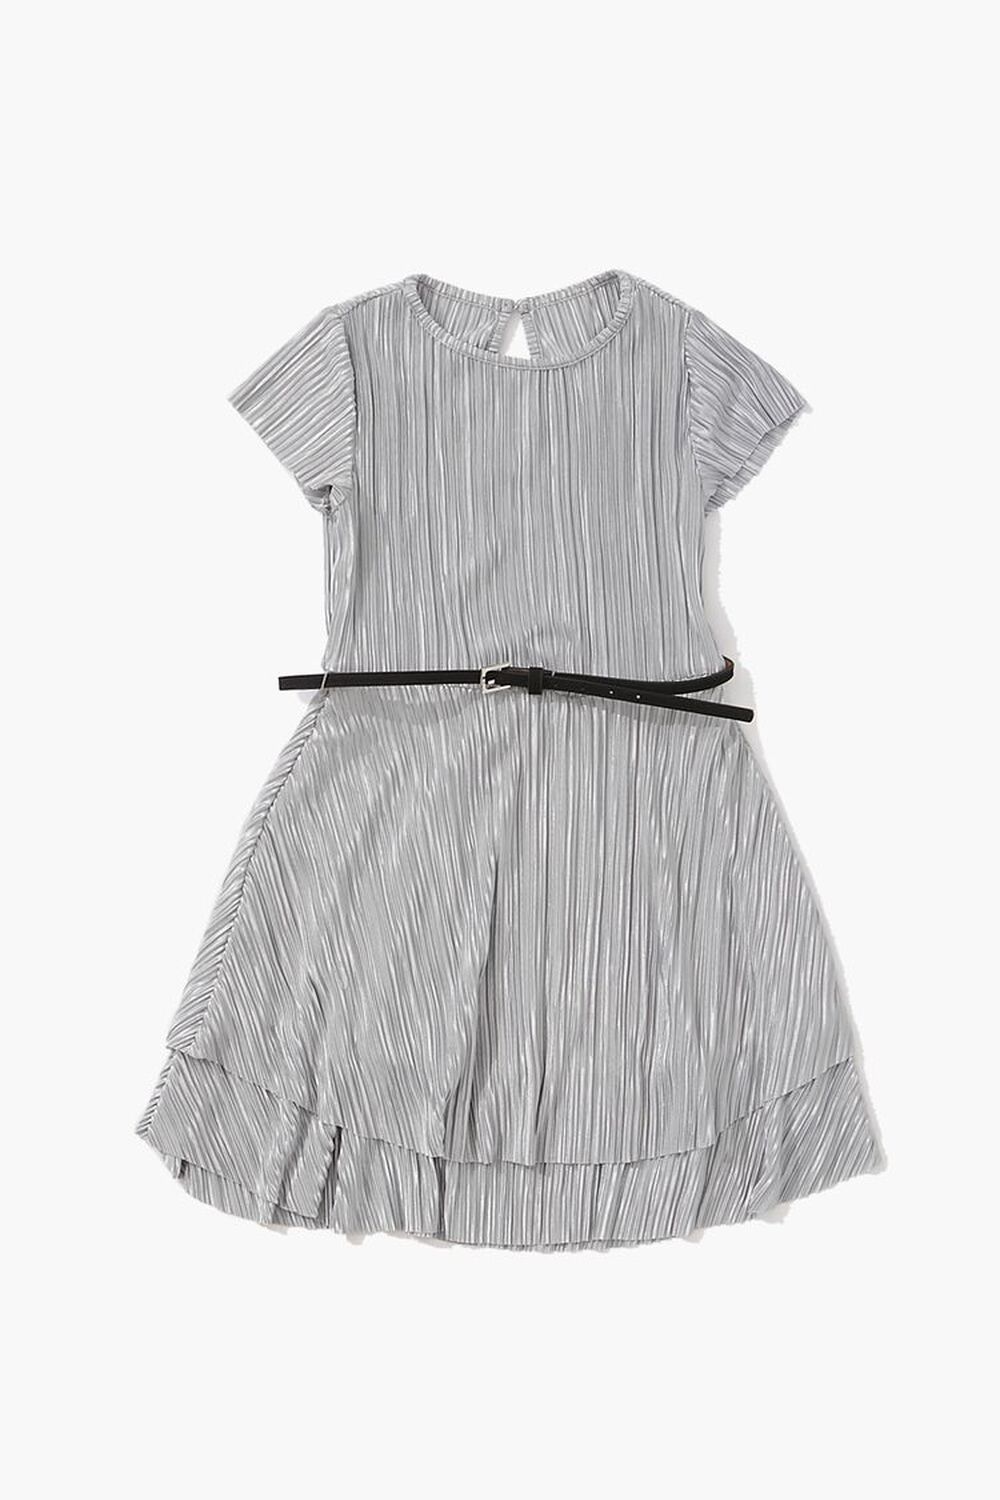 SILVER Girls Belted Pleated Dress (Kids), image 1